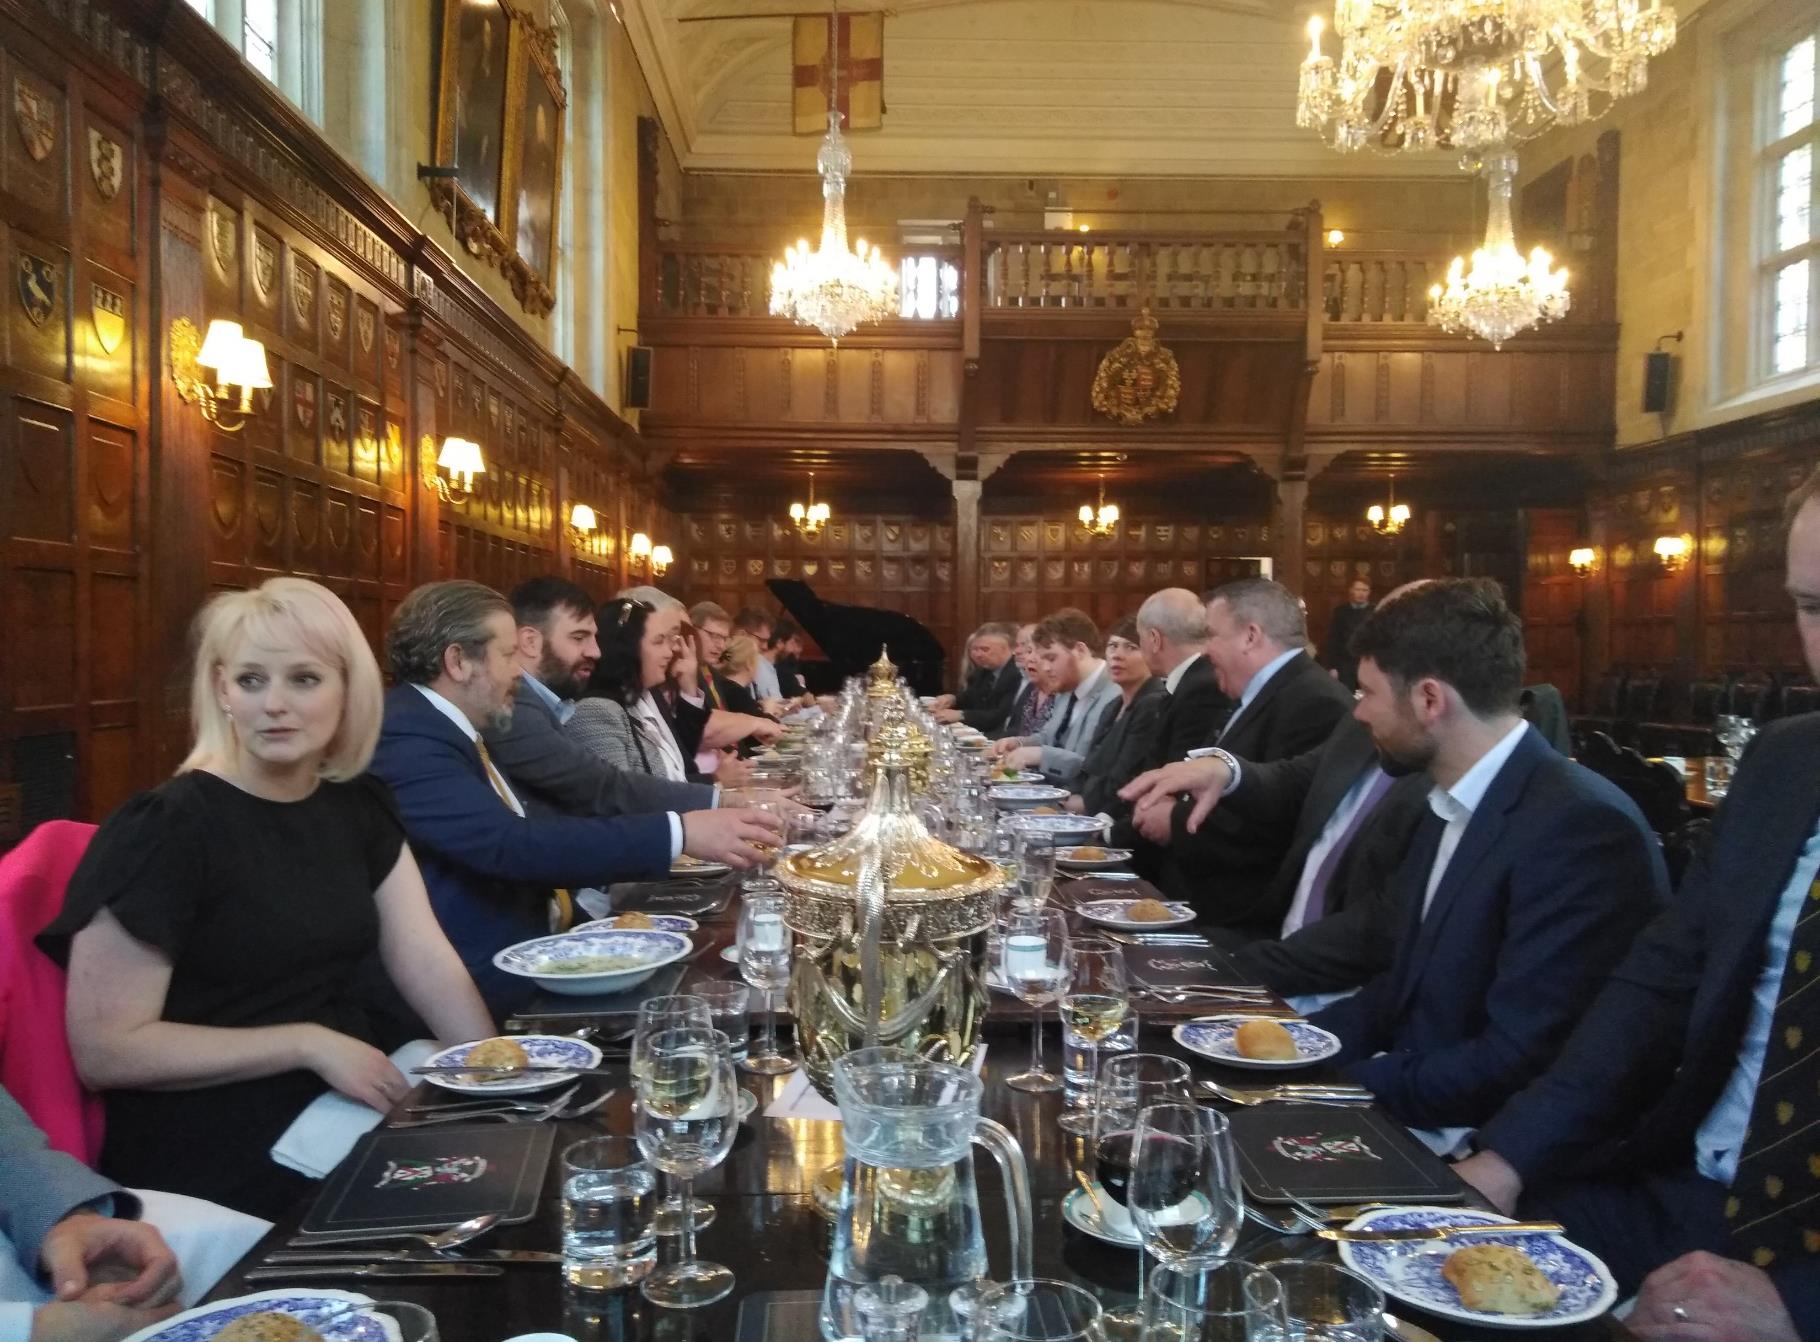 WCC Lunch at Ironmongers 20-05-24